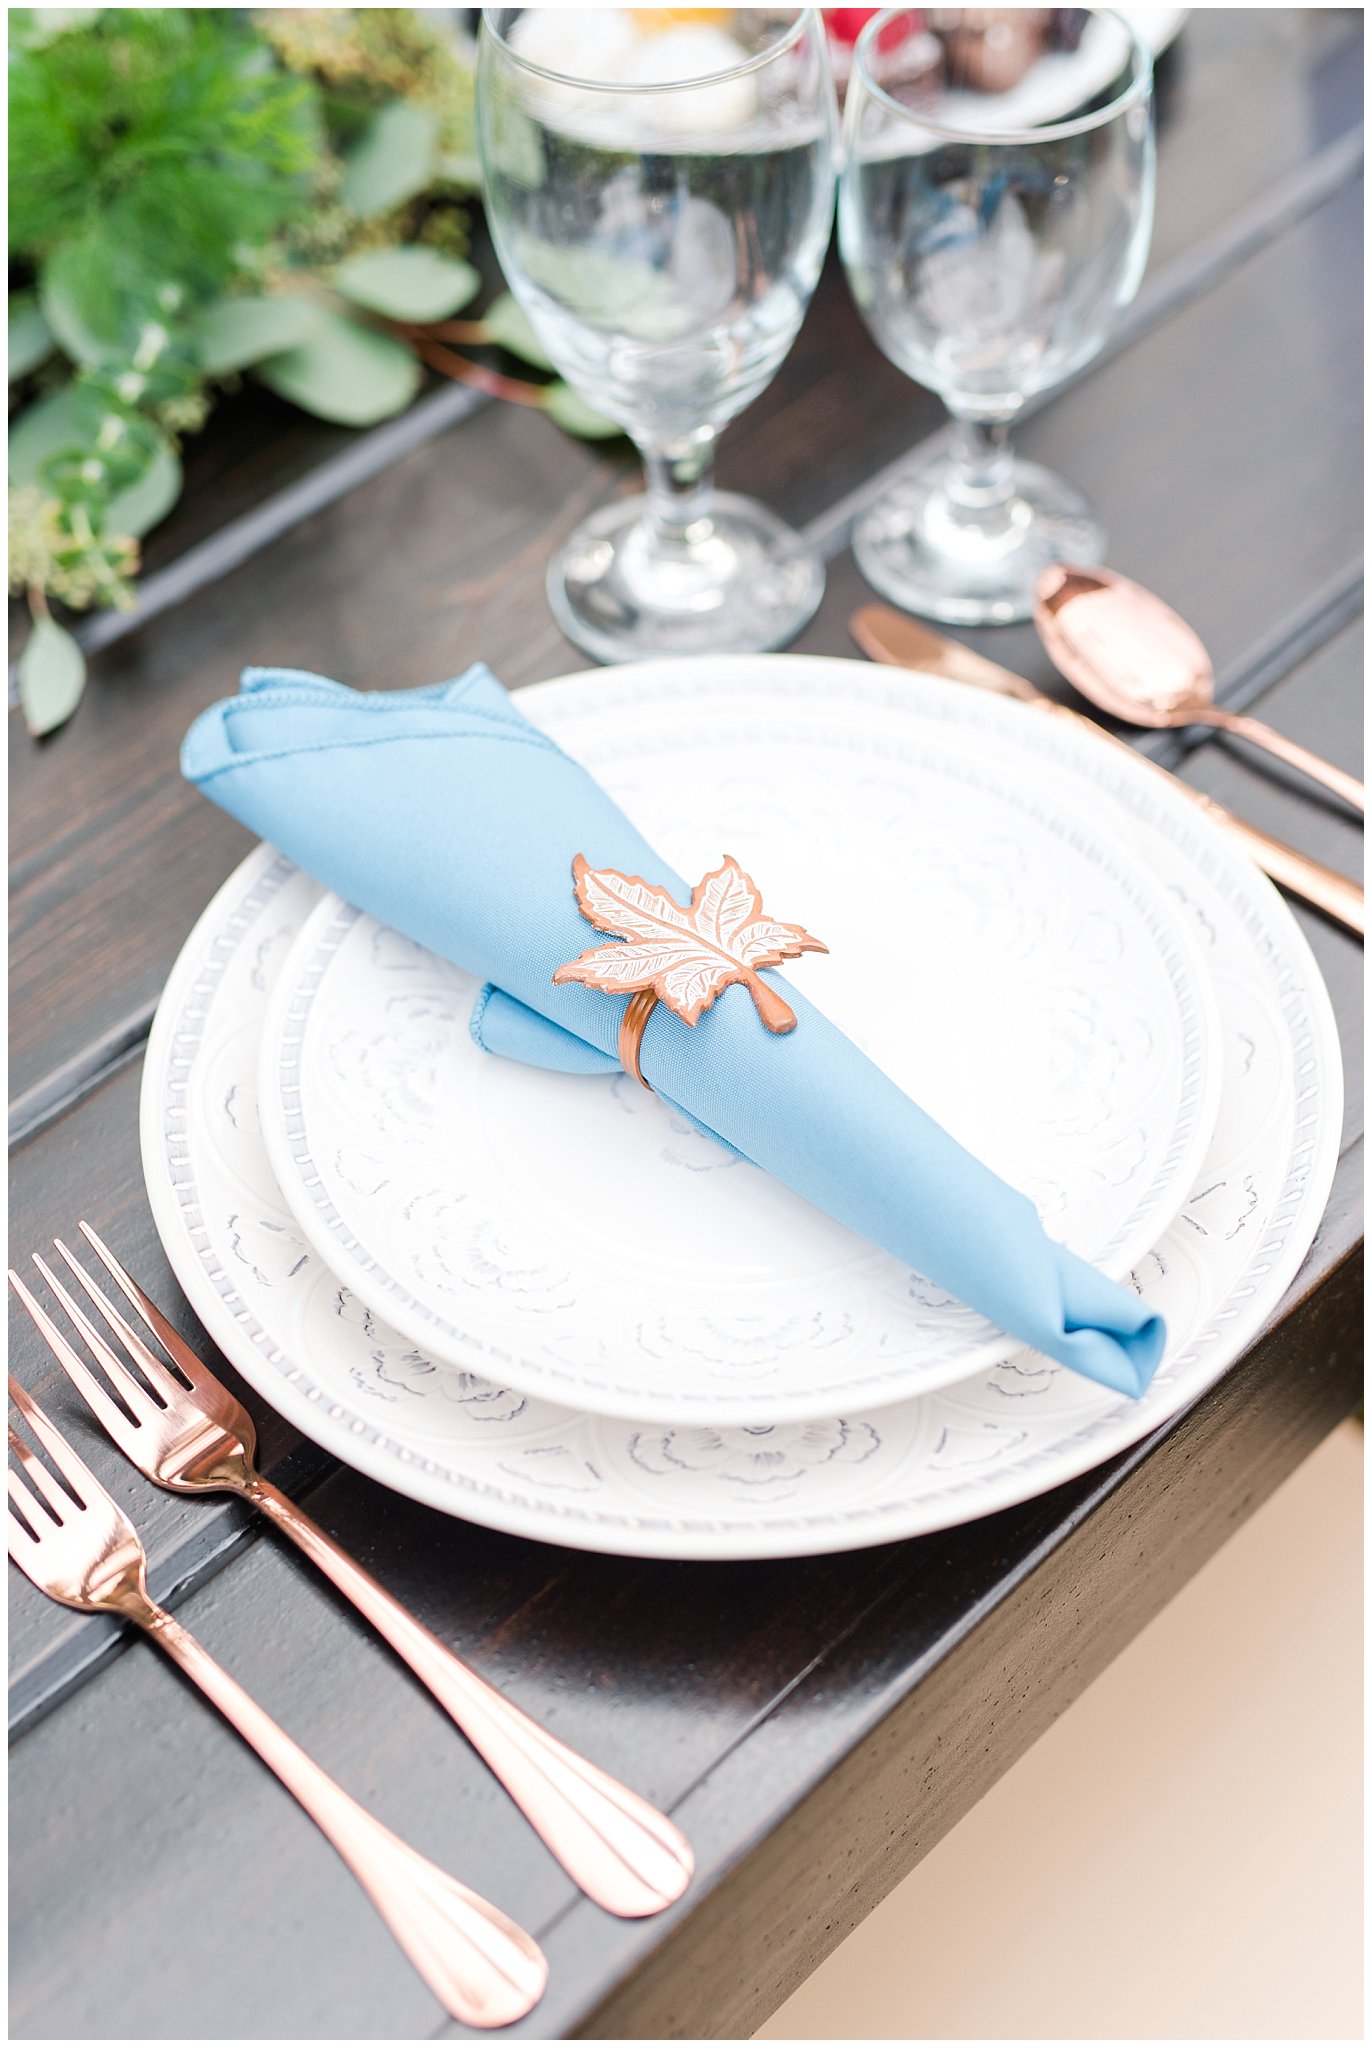 Maple leaf and light blue and copper wedding plate setting details at Oak Hills Reception and Event Center | Top Utah Wedding and Couples Photos 2019 | Jessie and Dallin Photography